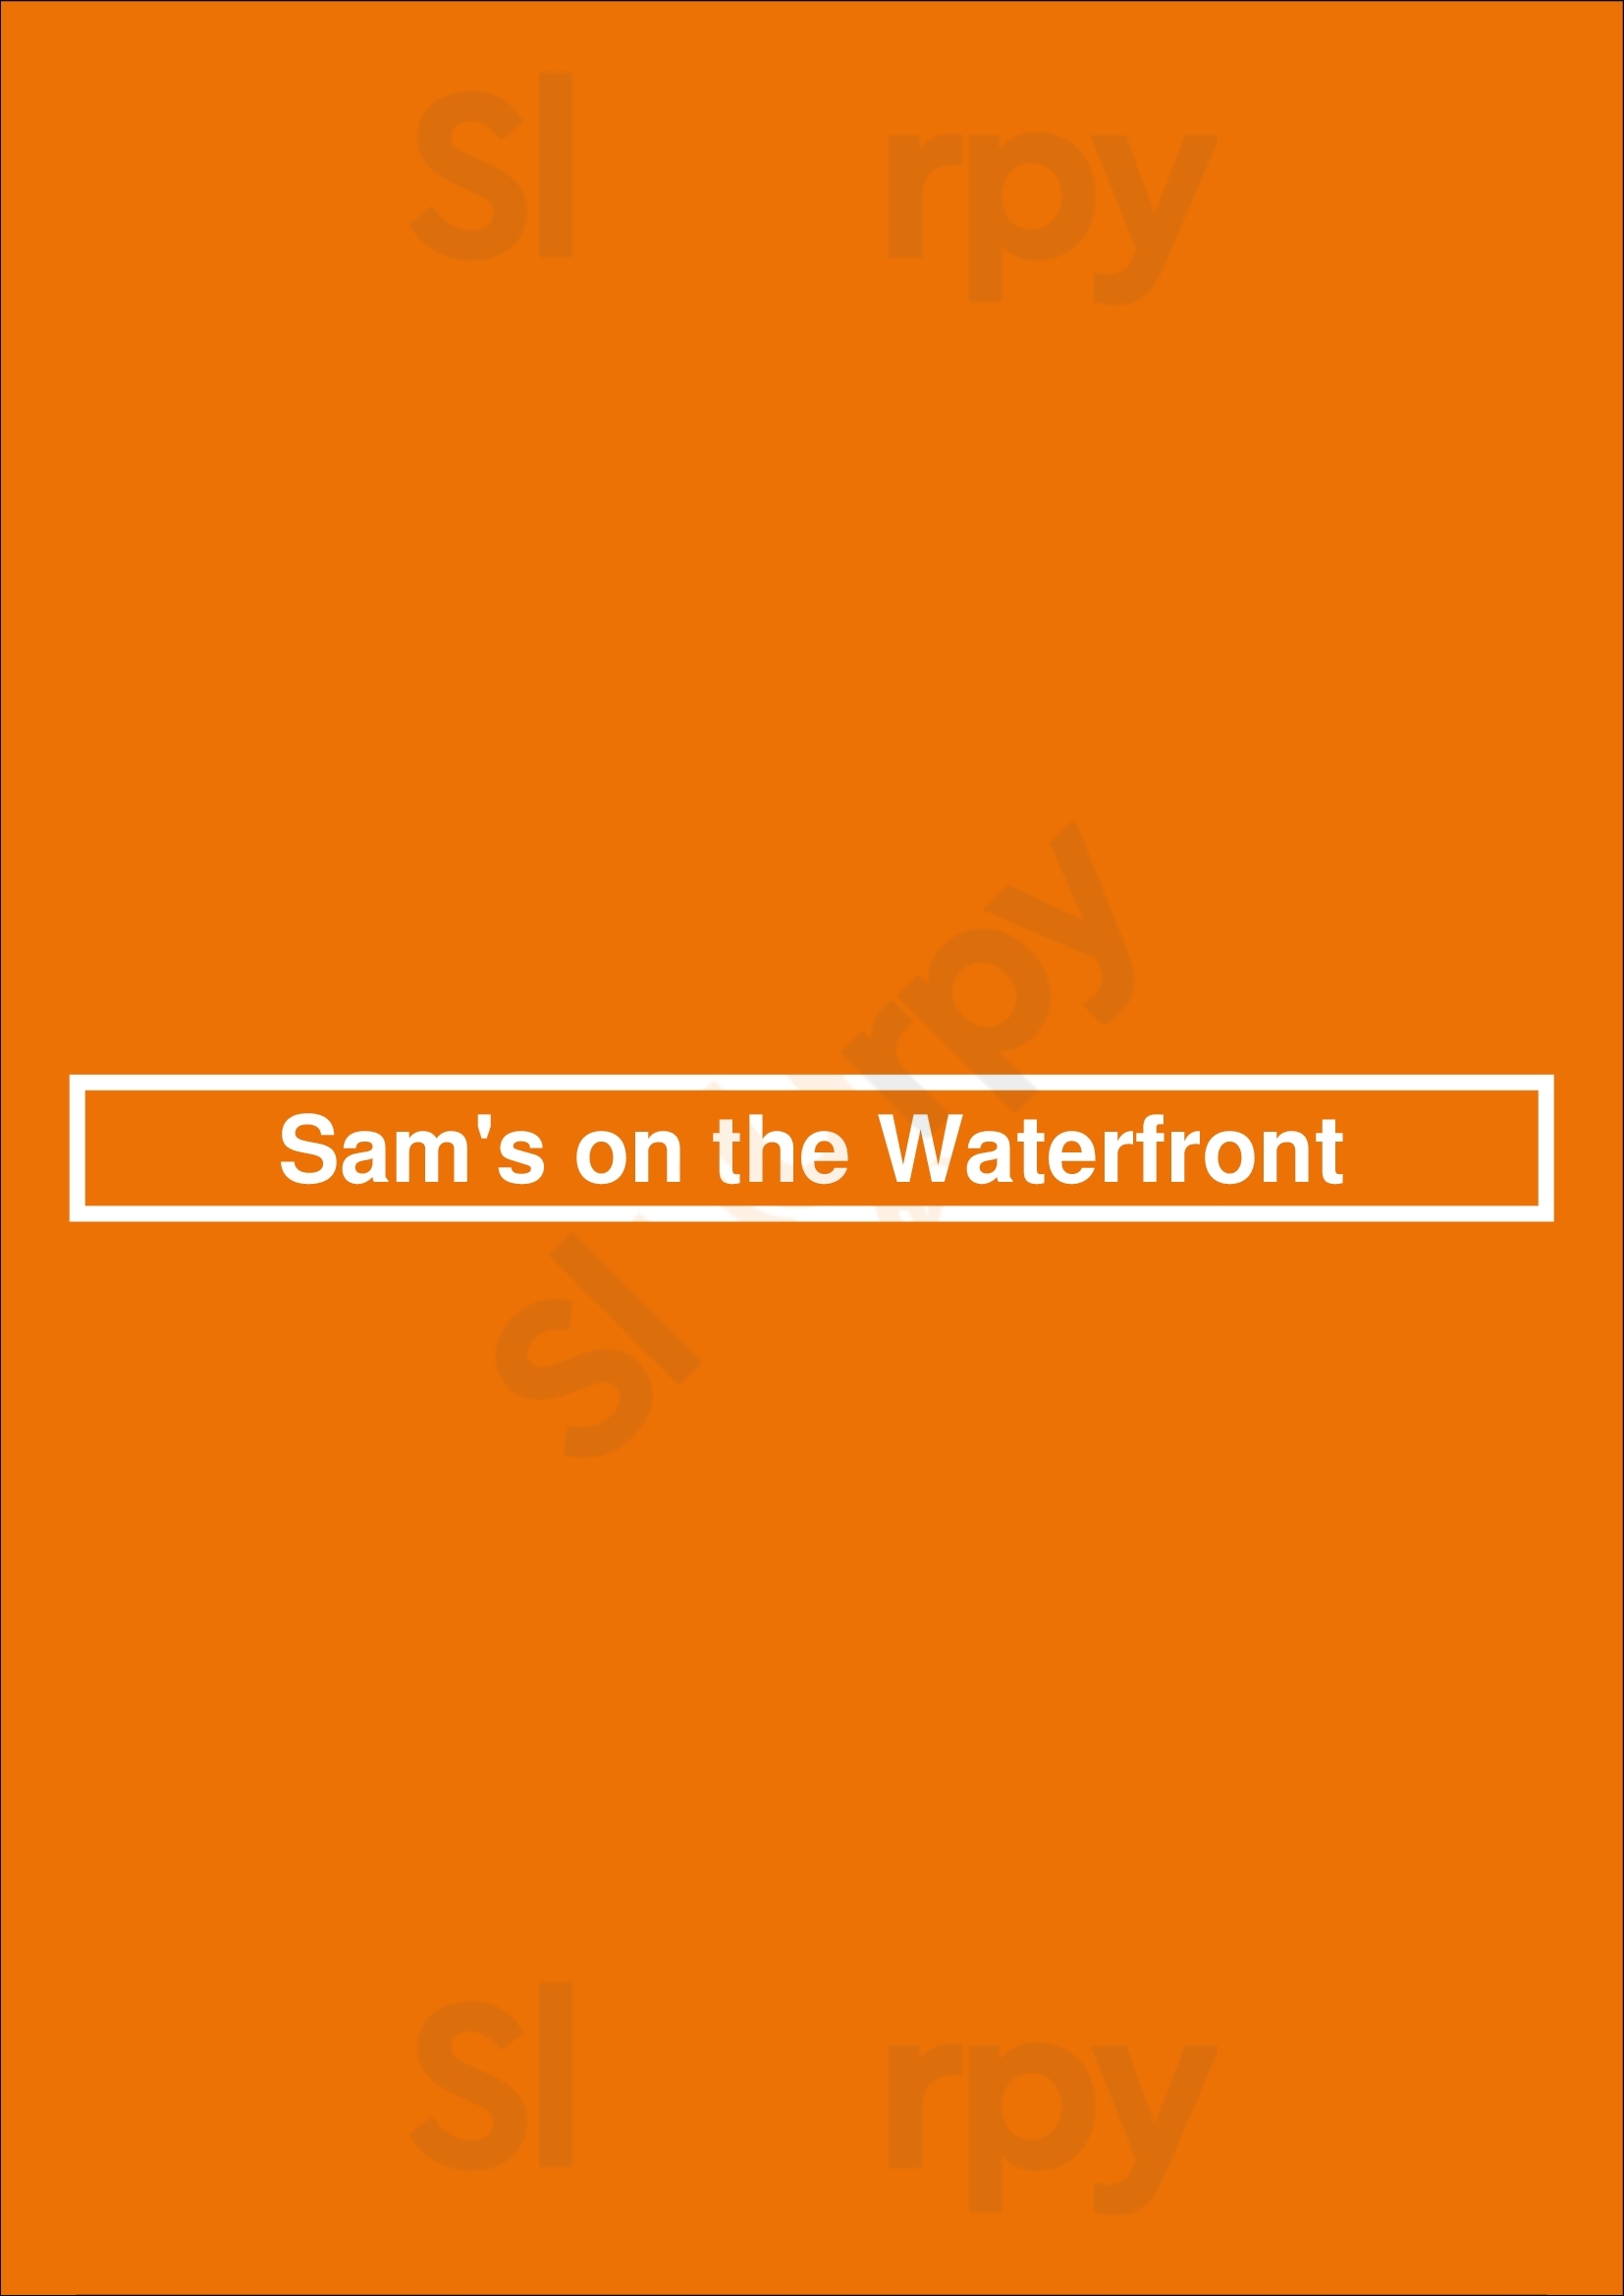 Sam's On The Waterfront Annapolis Menu - 1